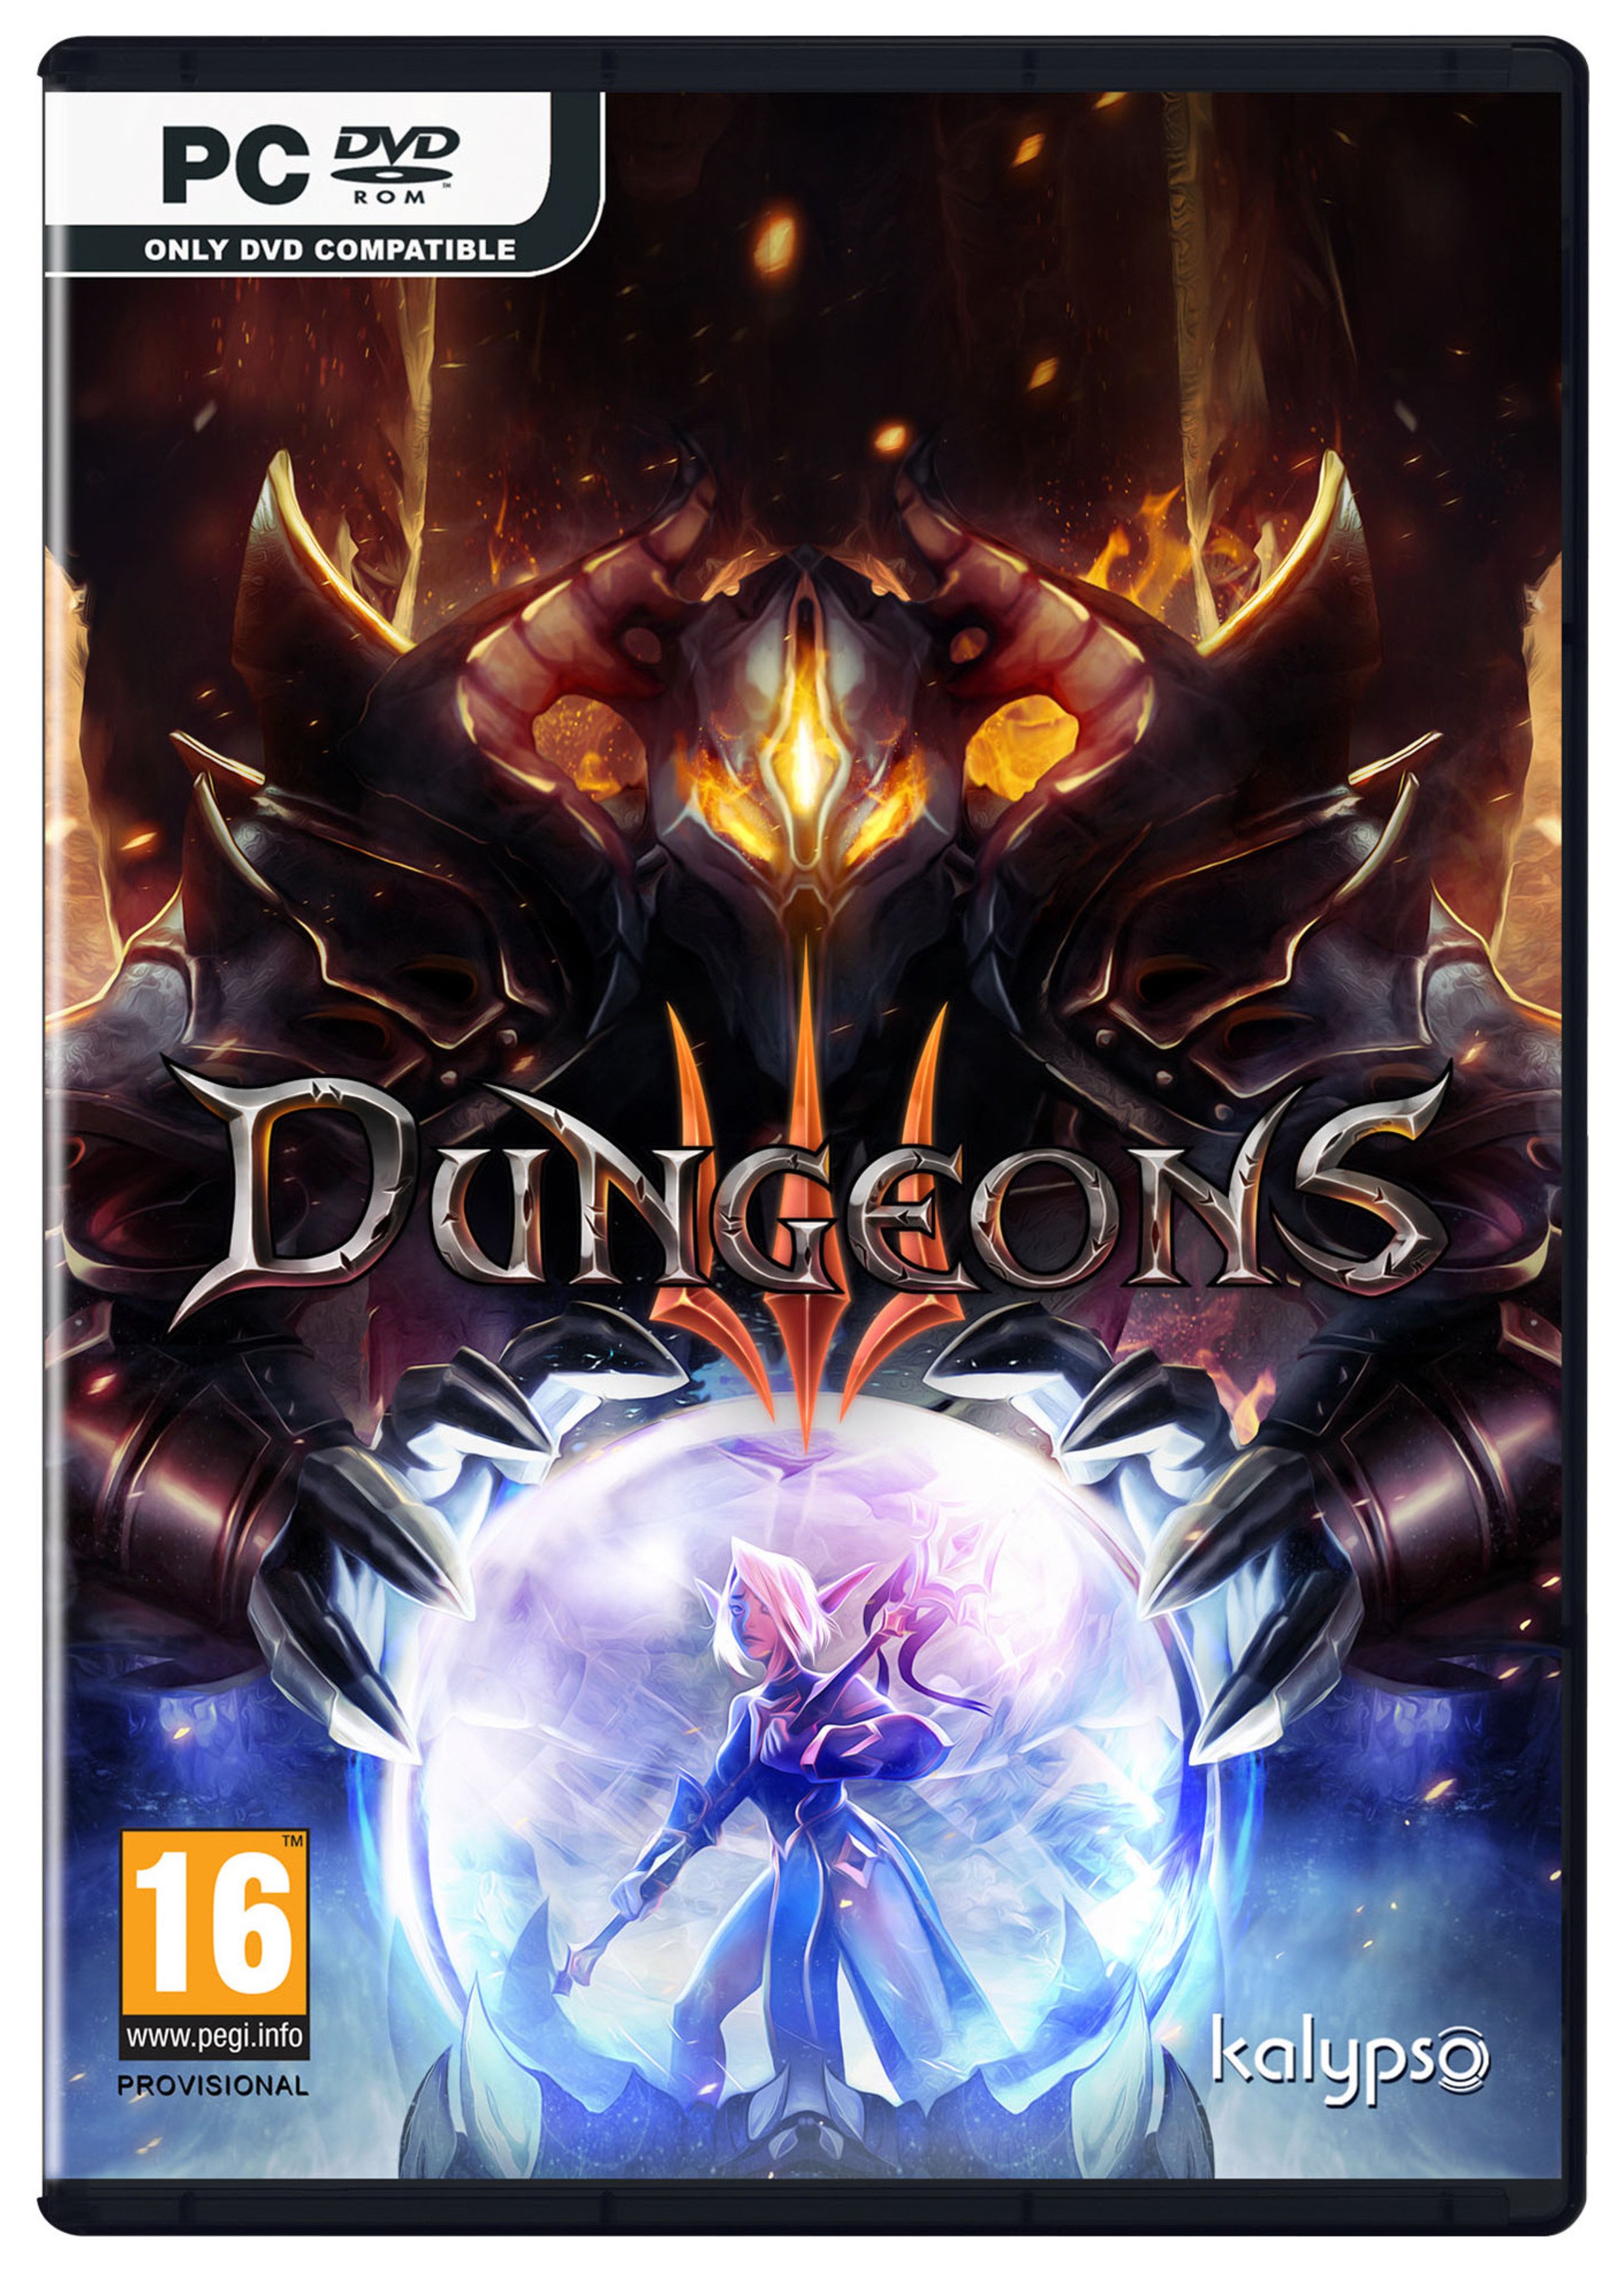 Dungeons 3 PC Game.